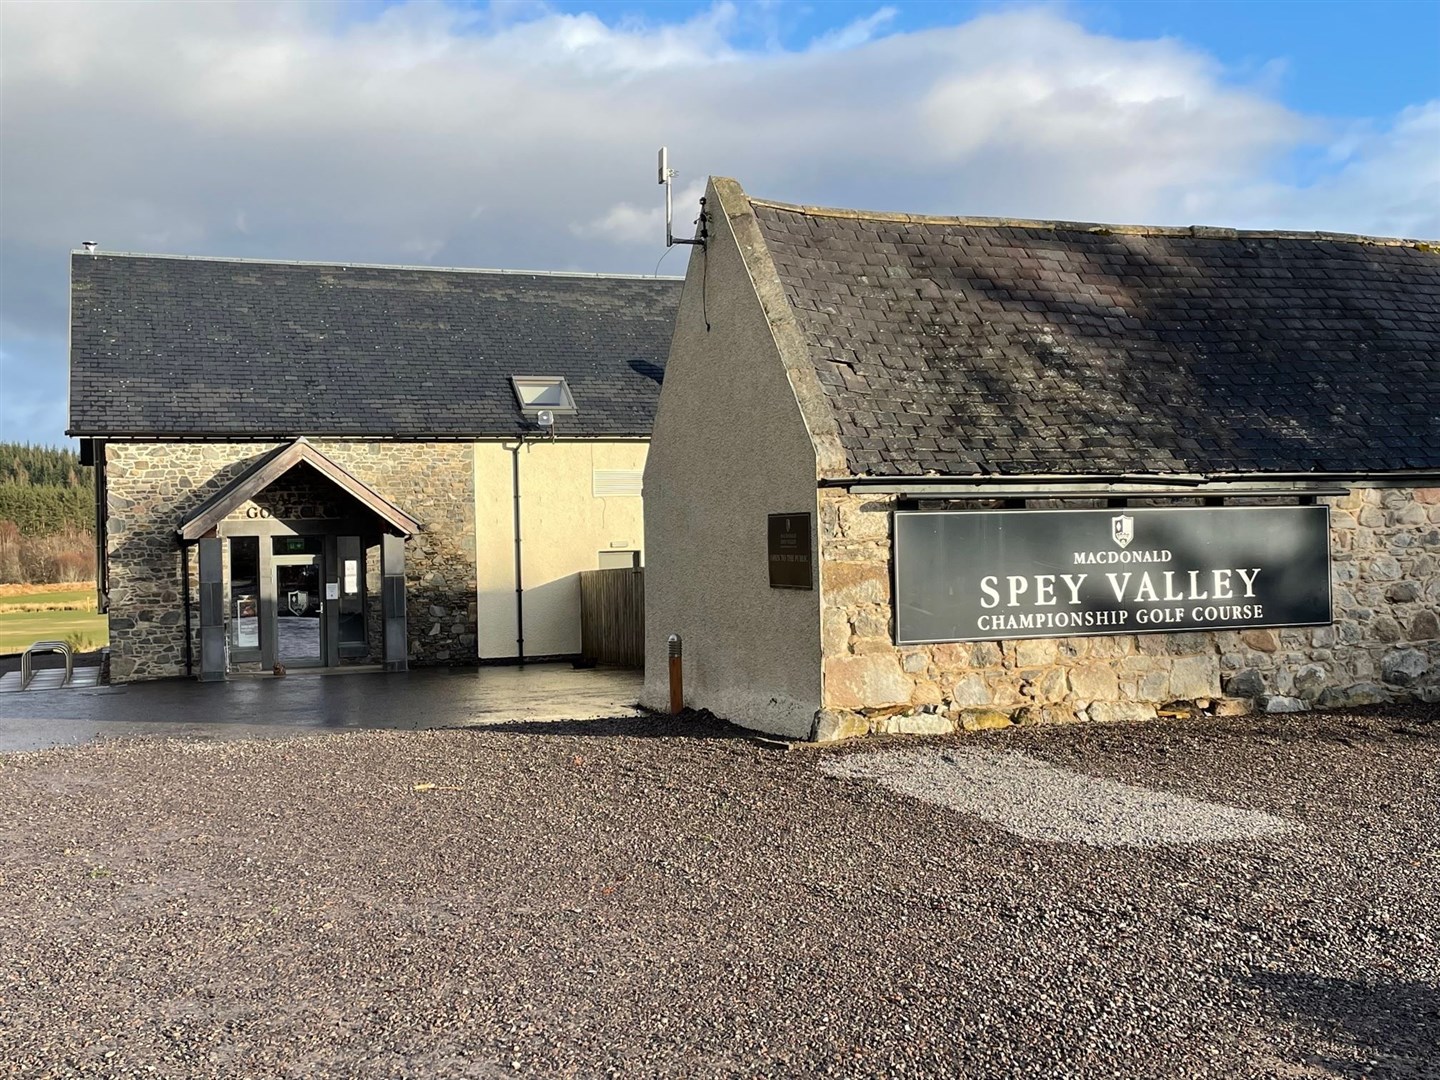 The clubhouse at Spey Valley golf course where Mr Brannan had been drinking and watching the Six Nations rugby.